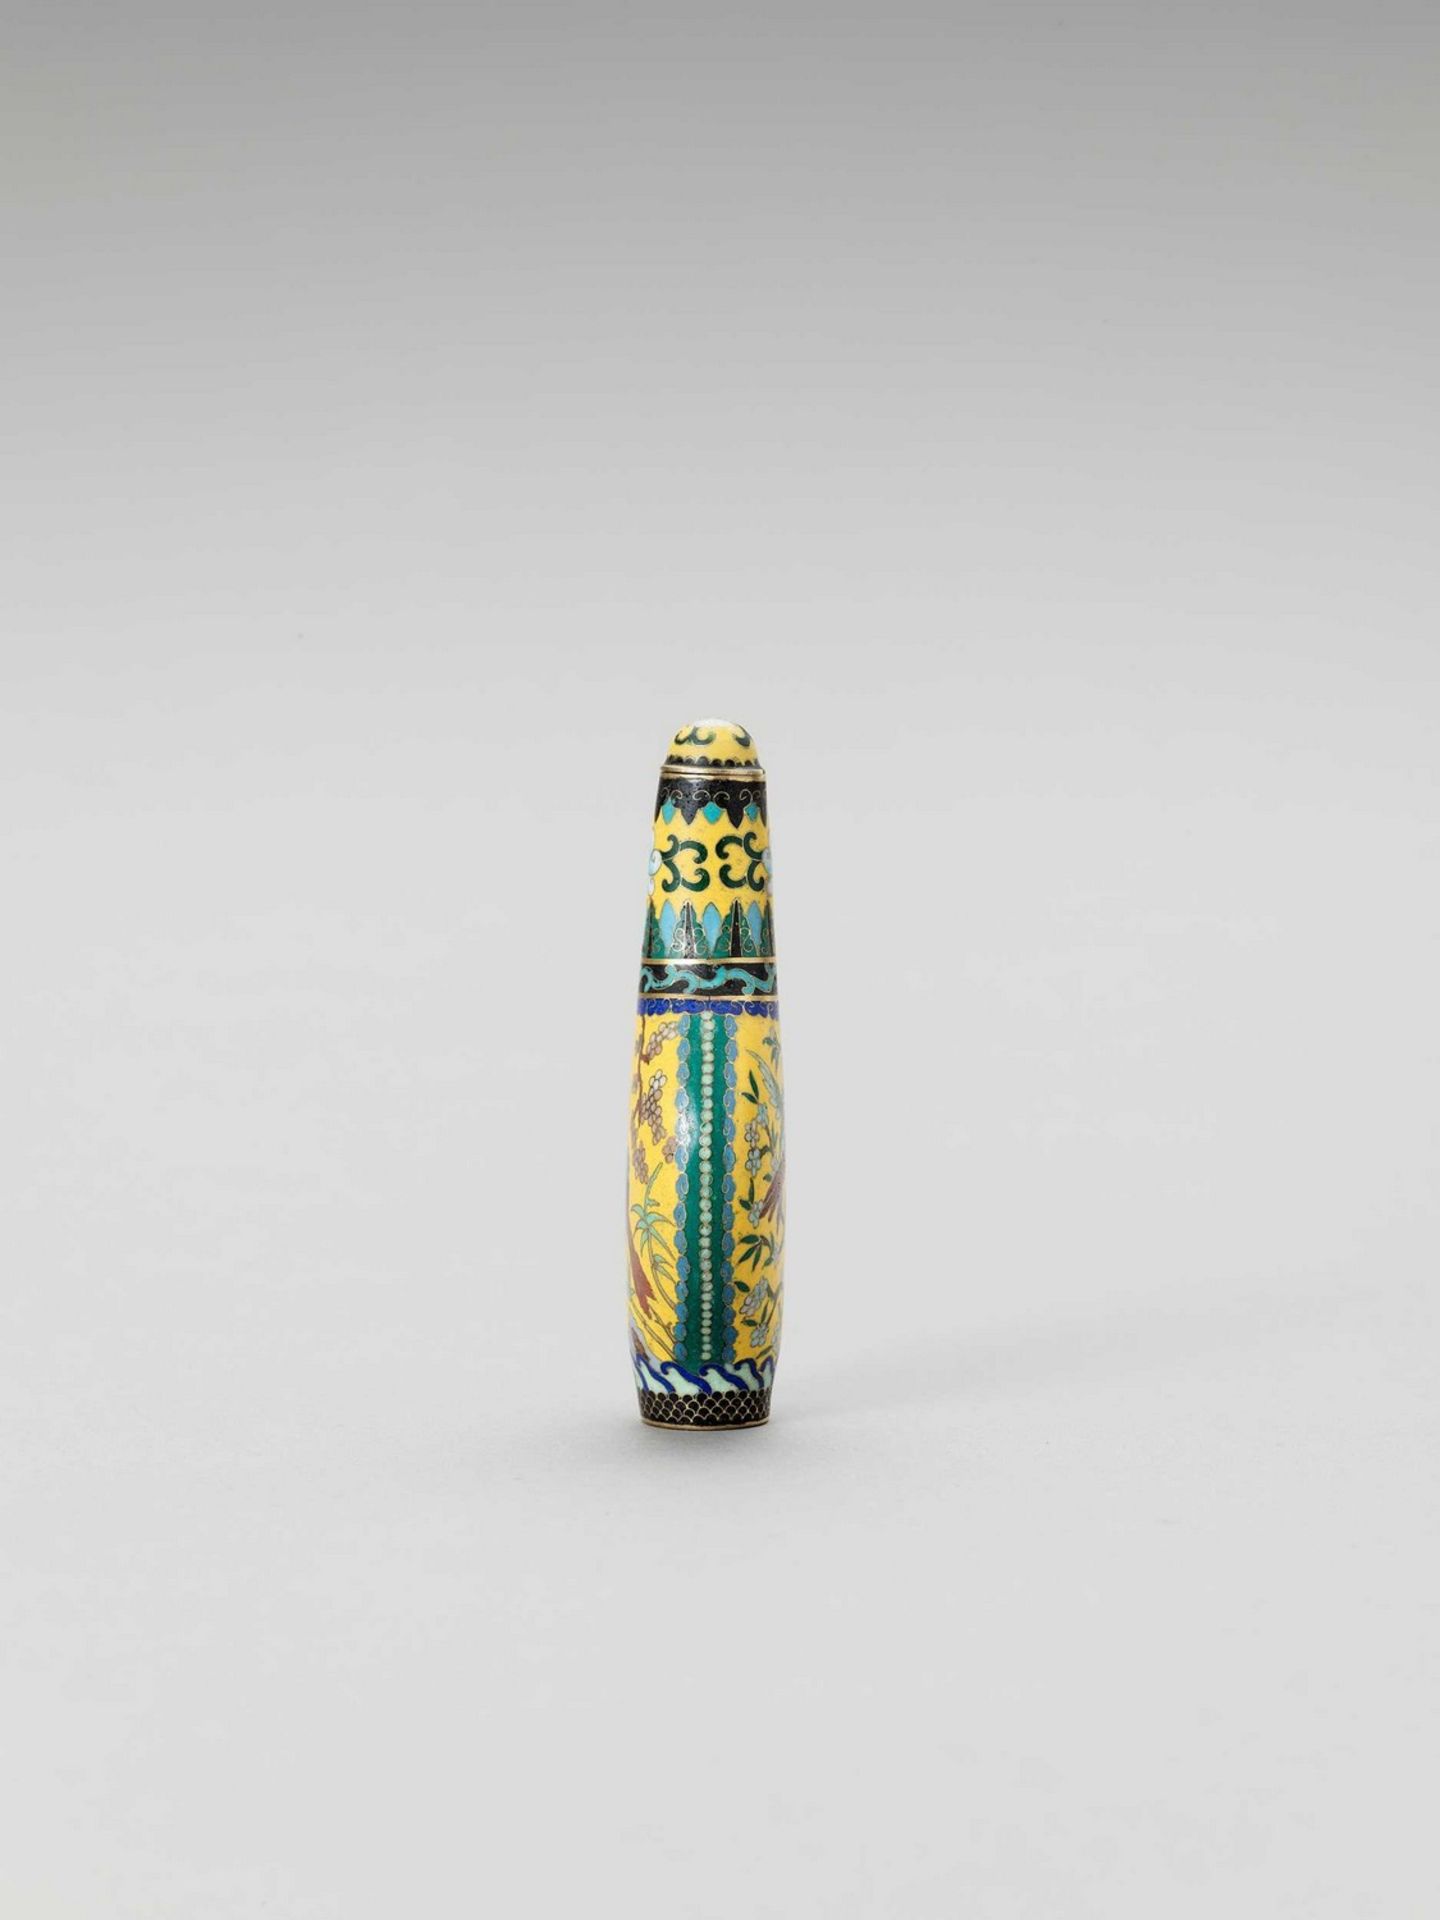 A CLOISONNE SNUFF BOTTLE WITH BIRDS - Image 4 of 7